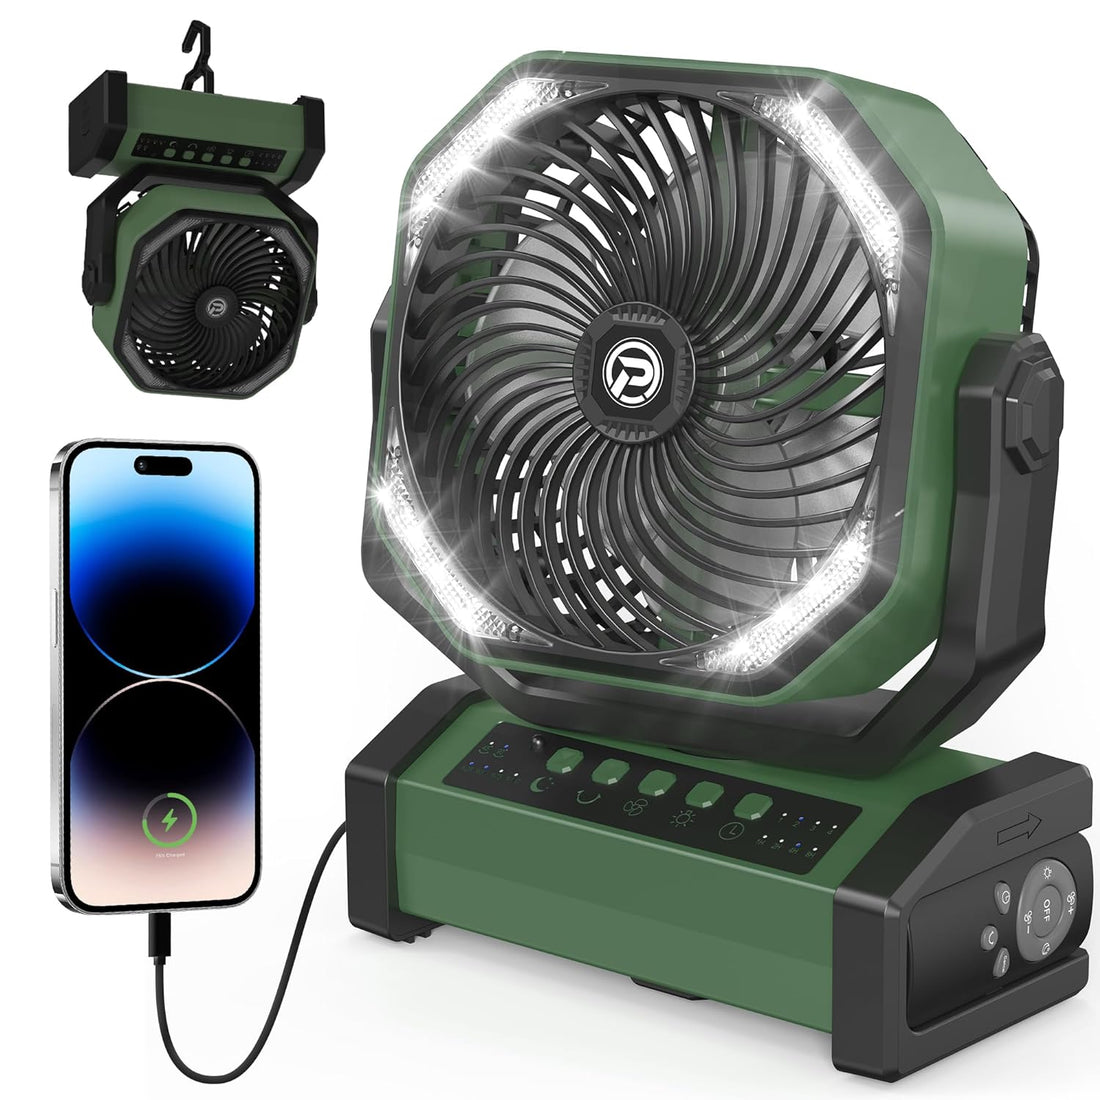 KITWLEMEN USB 20000mAh Table Fan with LED Light, Table Fan with Remote Control and 4 Speed Hook 4 Rechargeable Timer